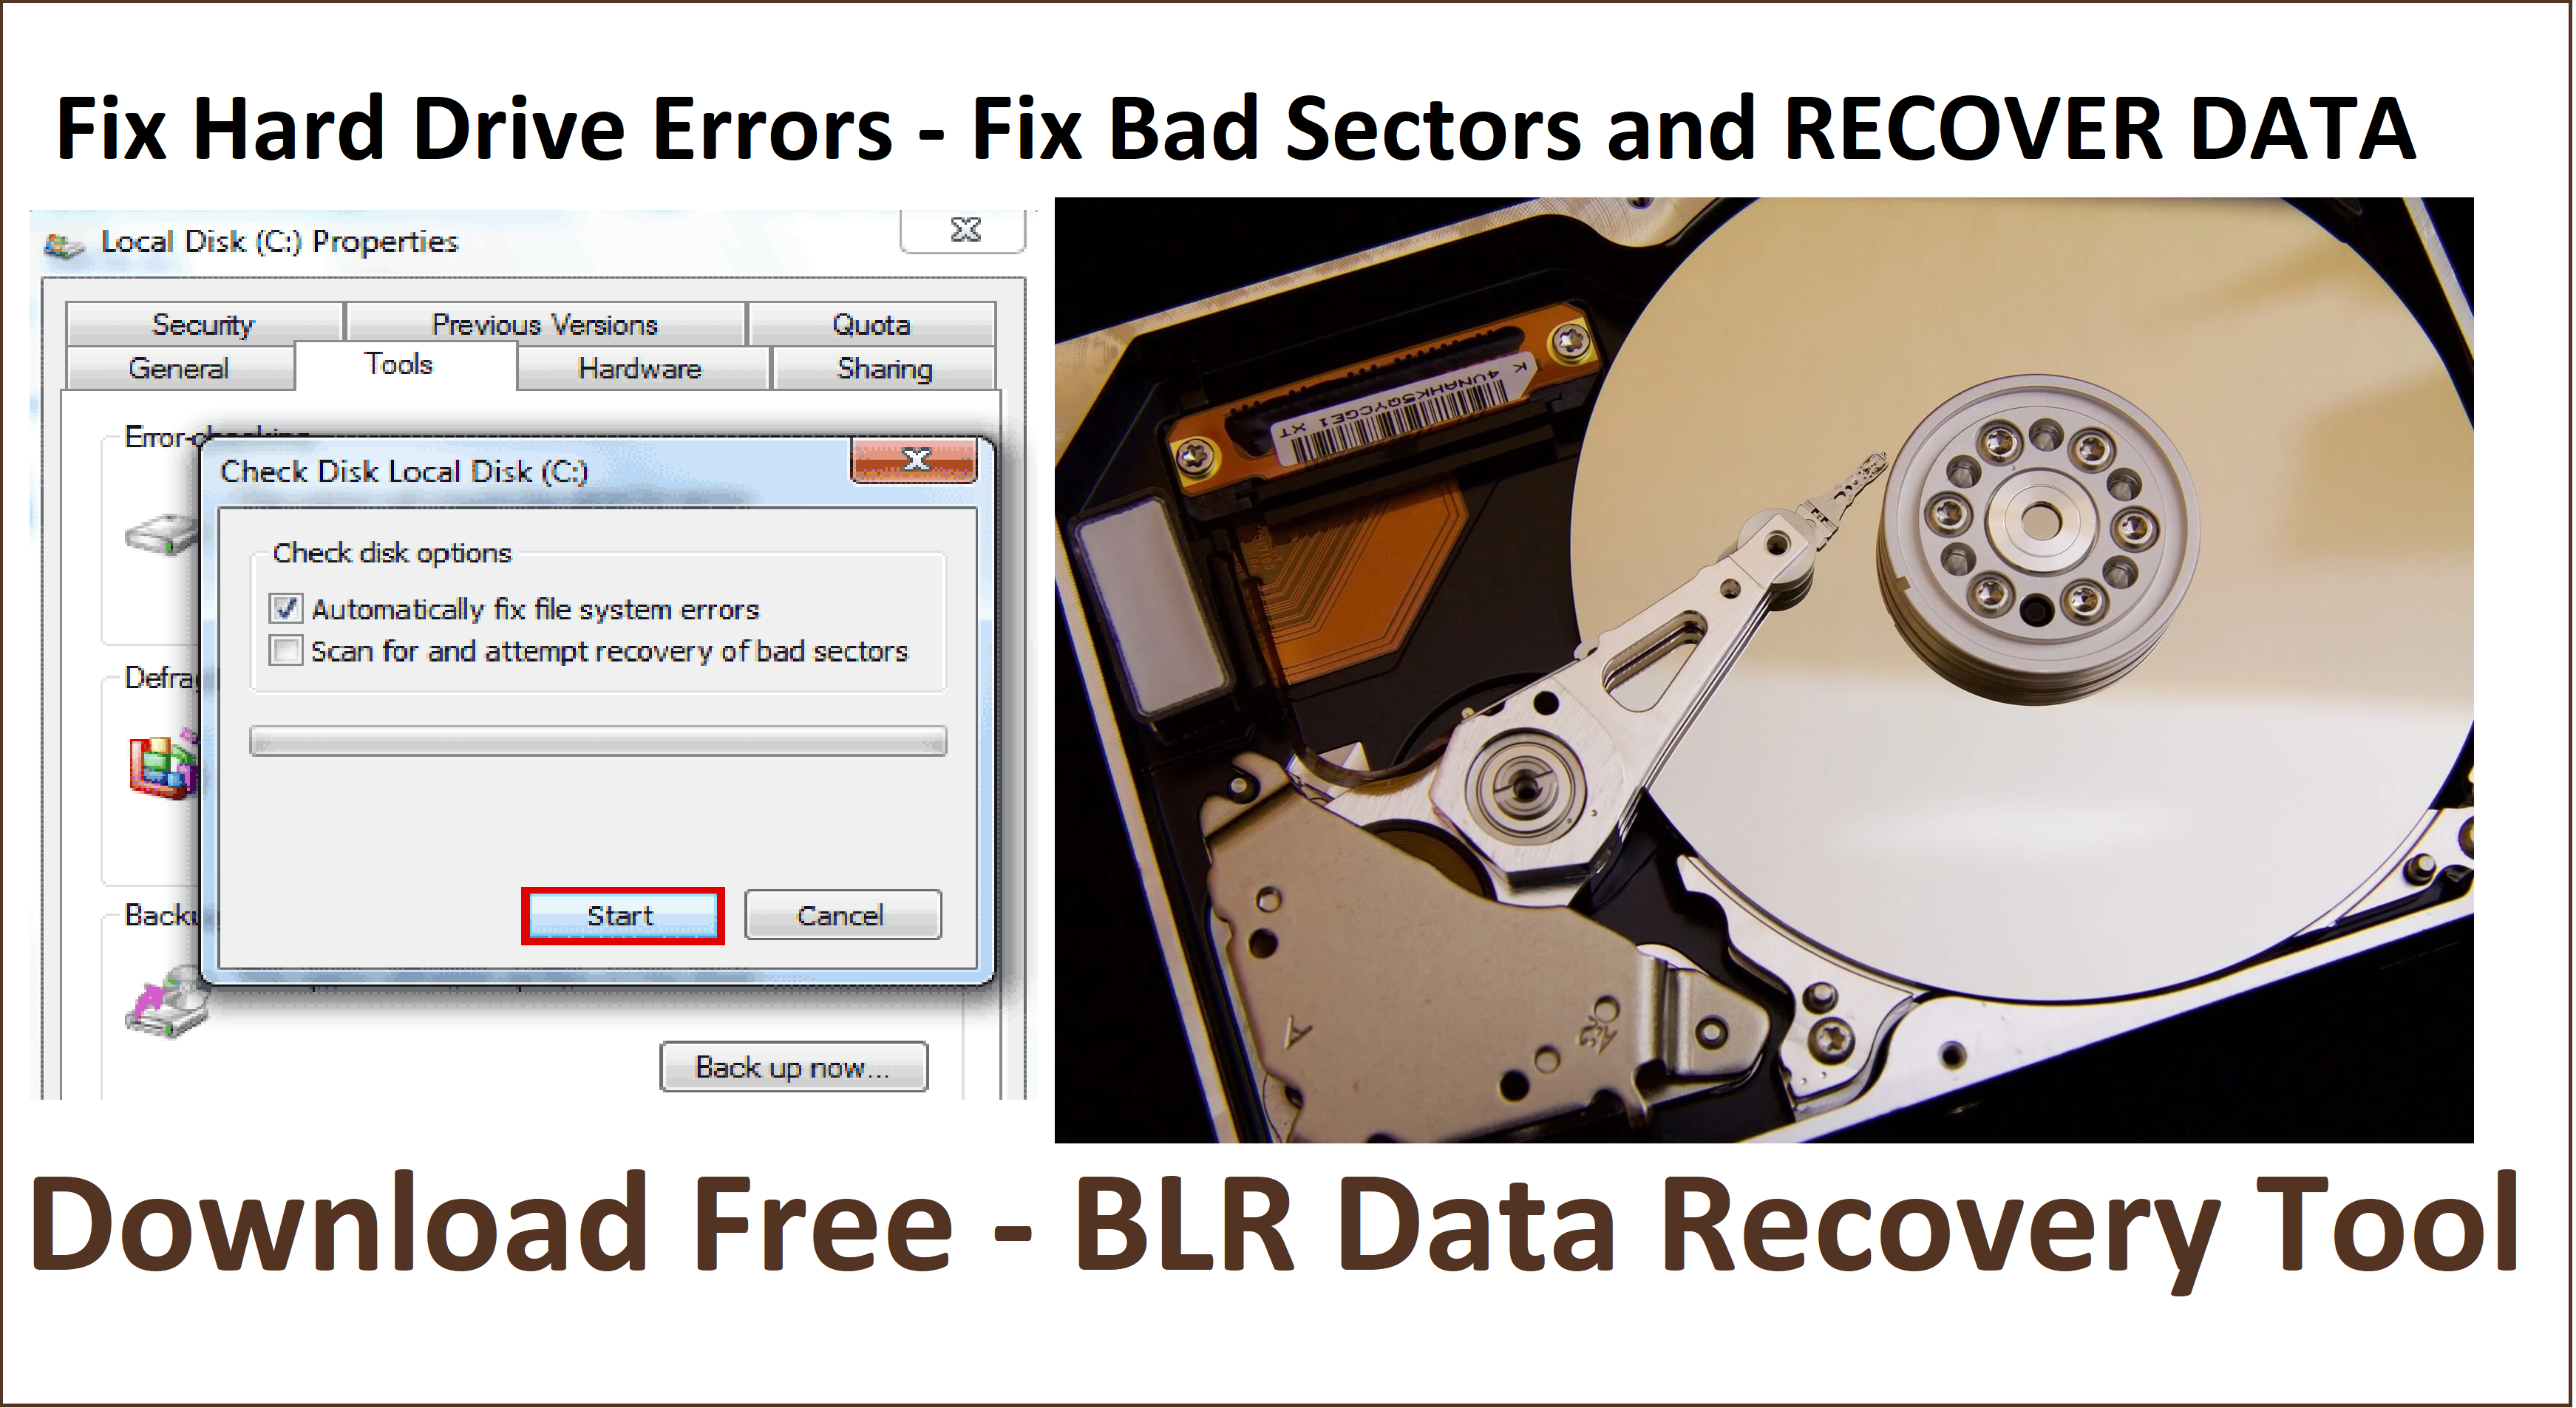 Methods to Solve and Fix Bad Sectors on Hard Drive